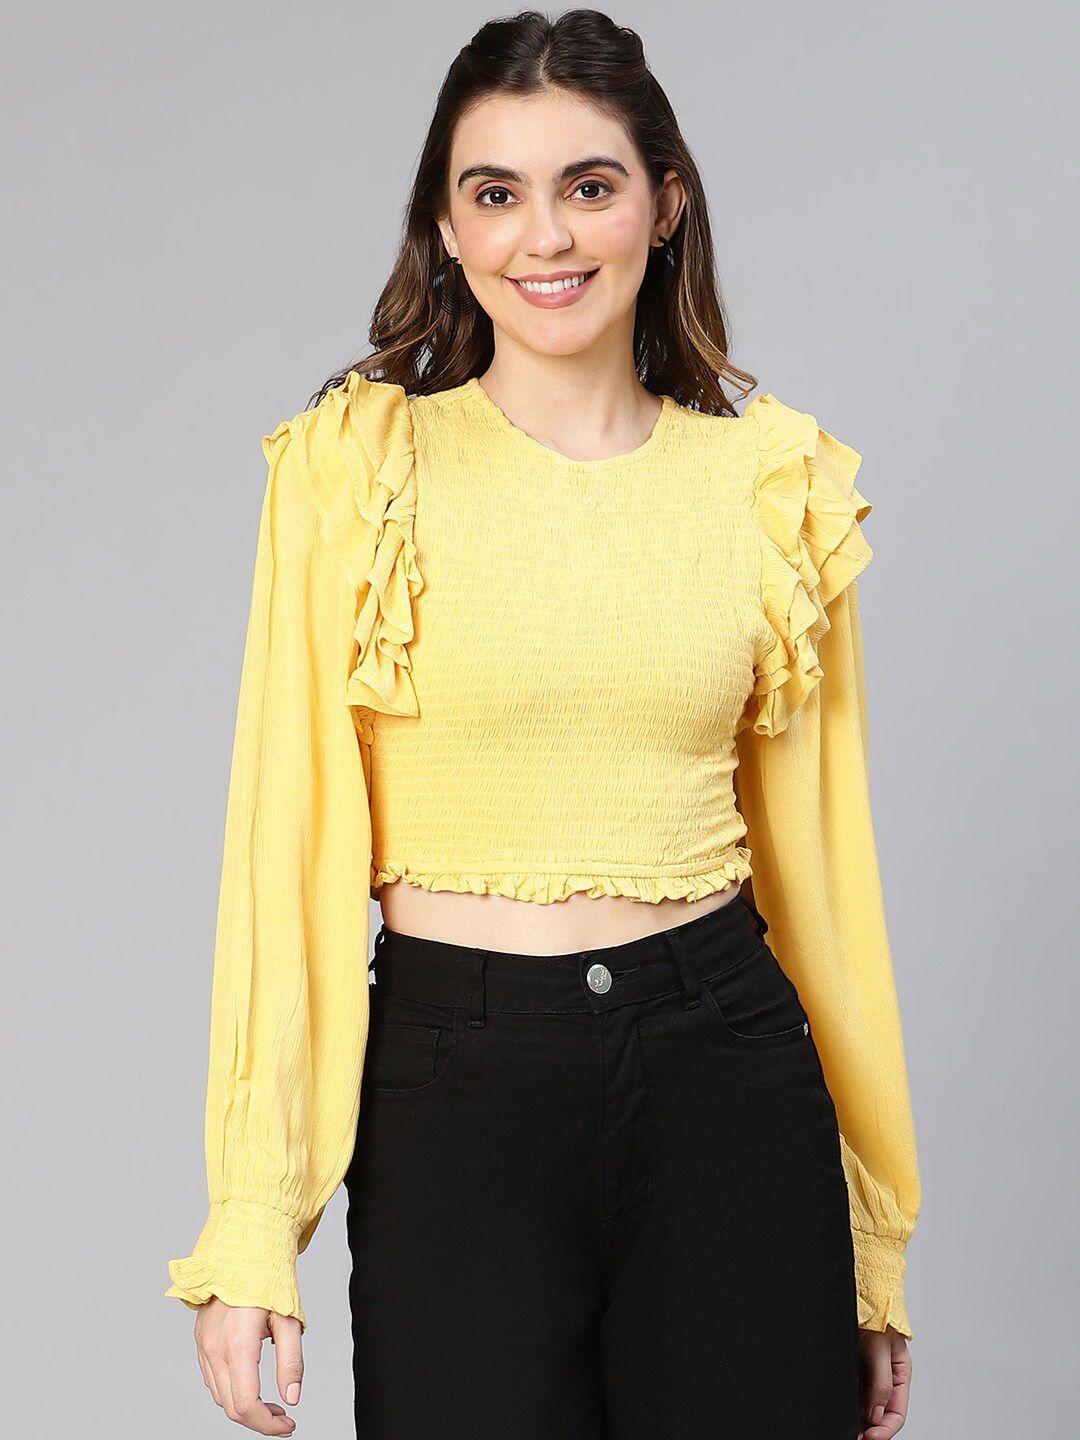 oxolloxo smocked & ruffled detail puff sleeves crepe crop top